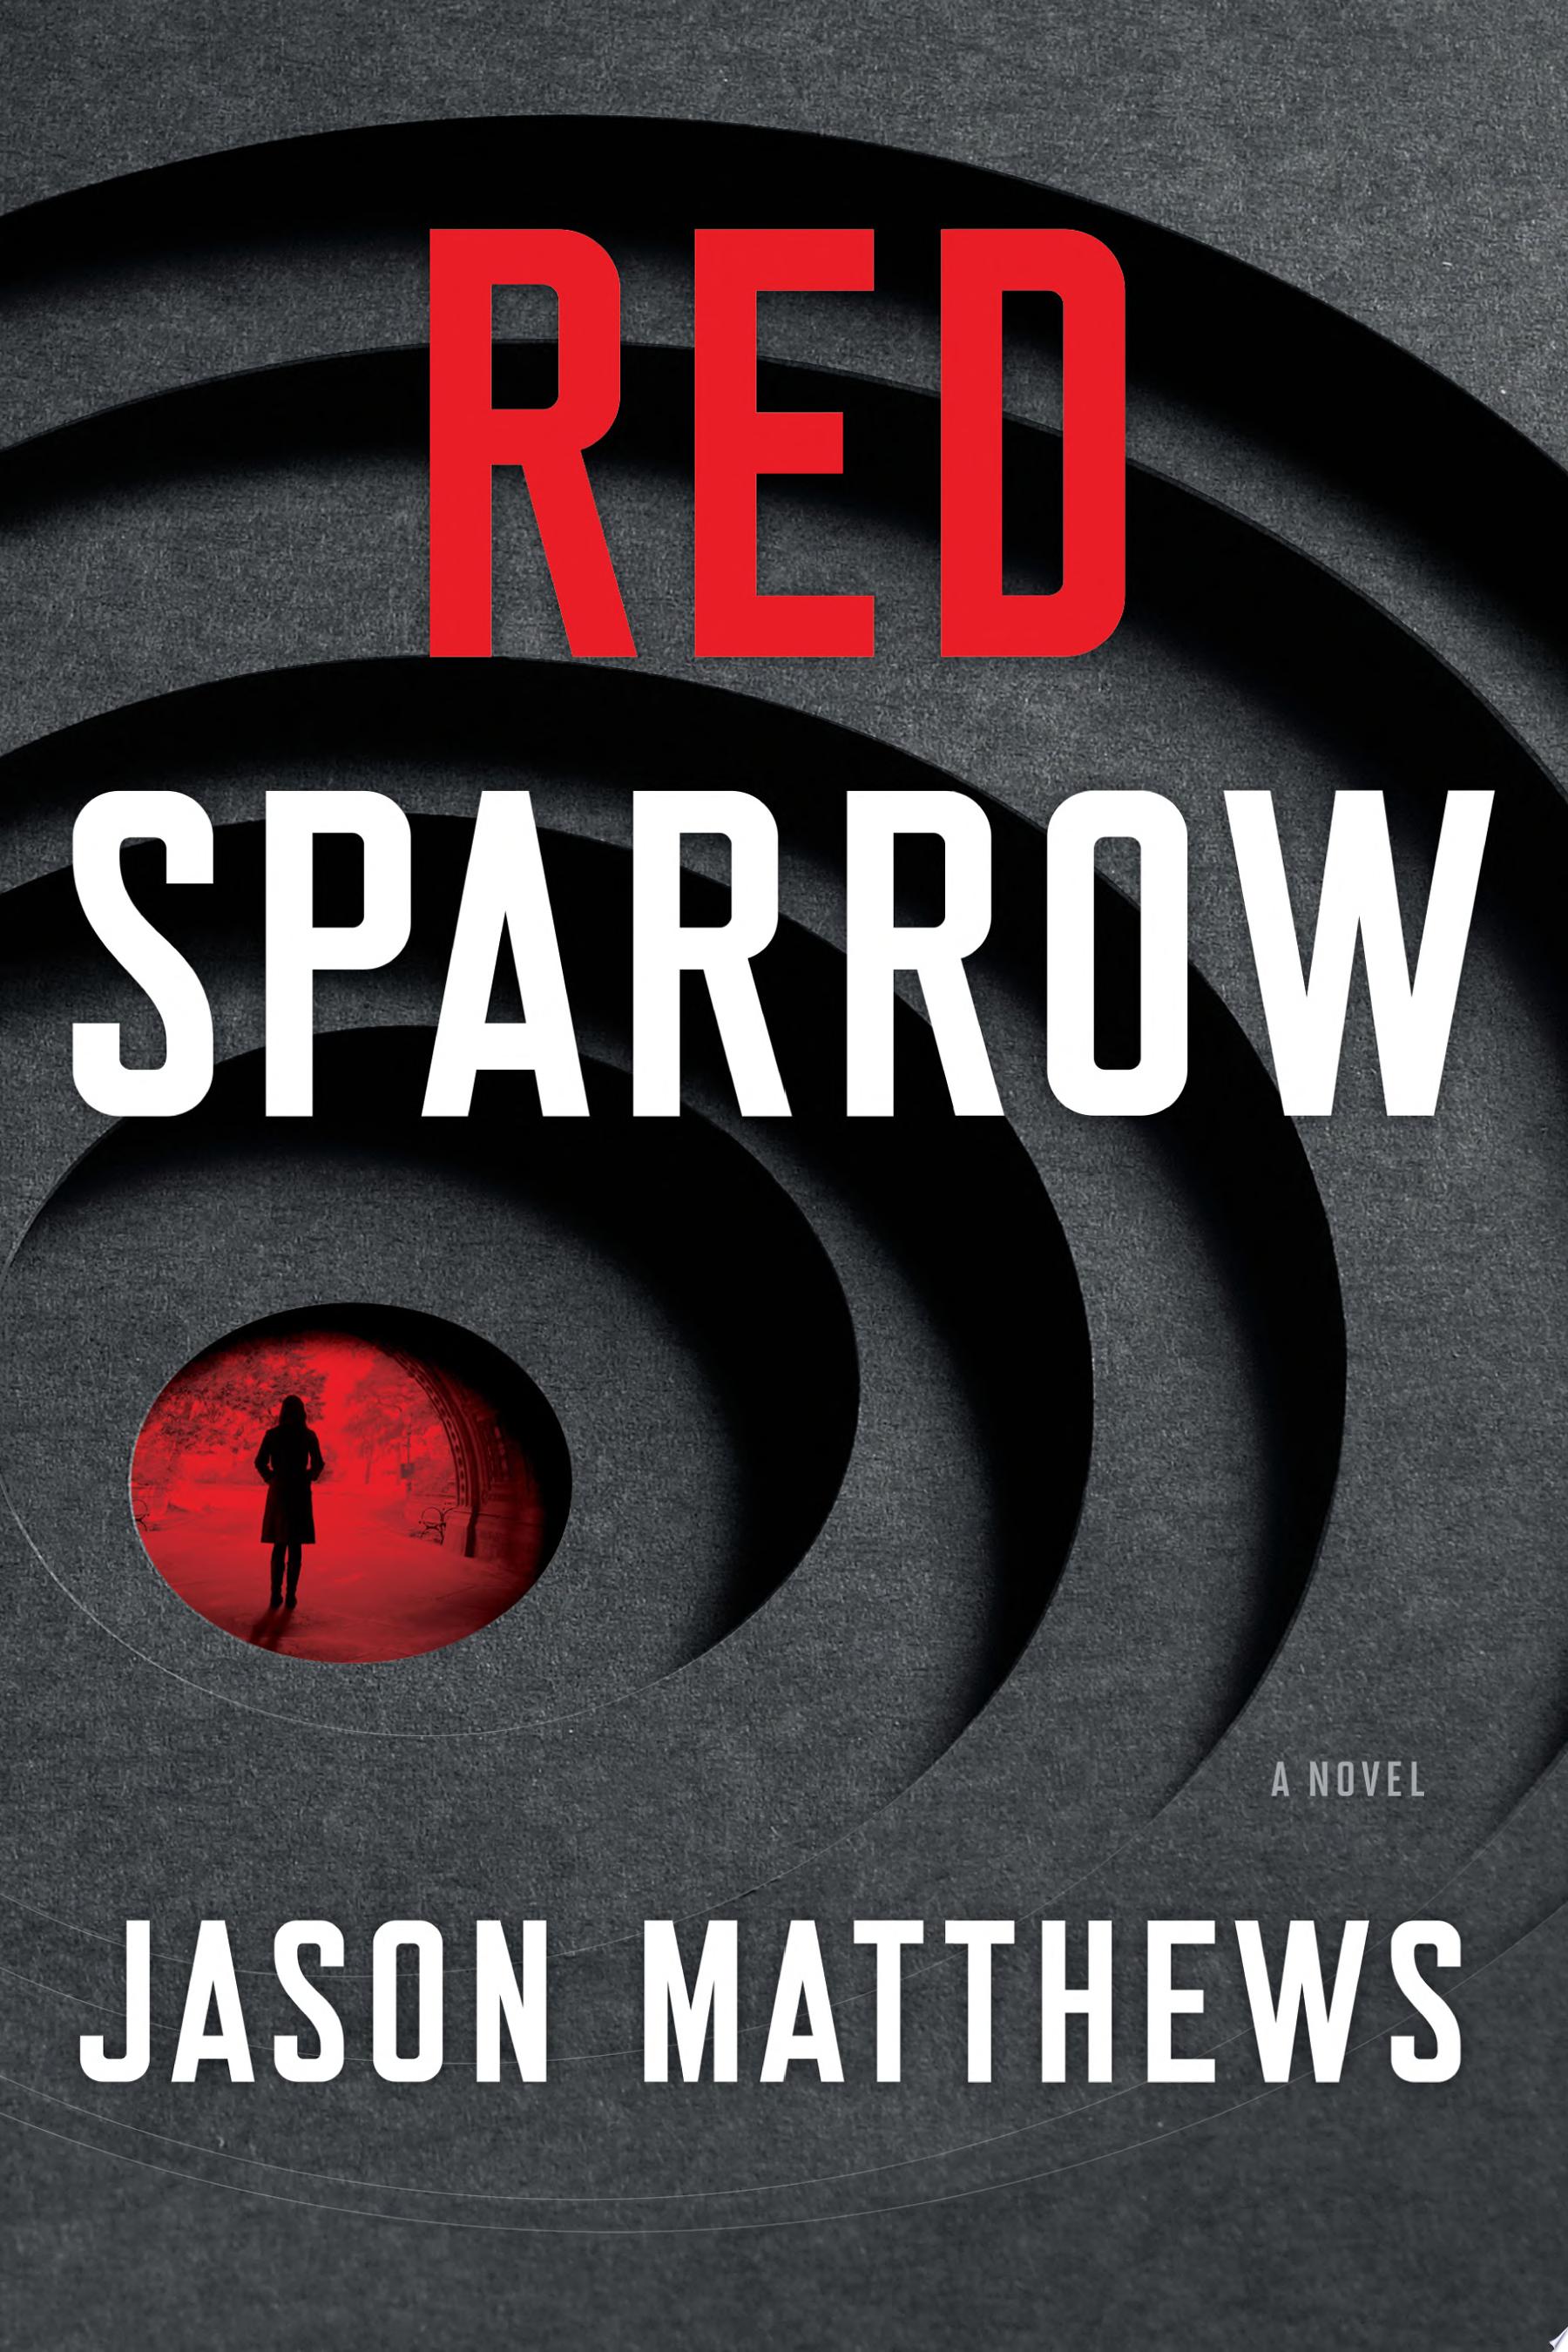 Image for "Red Sparrow"